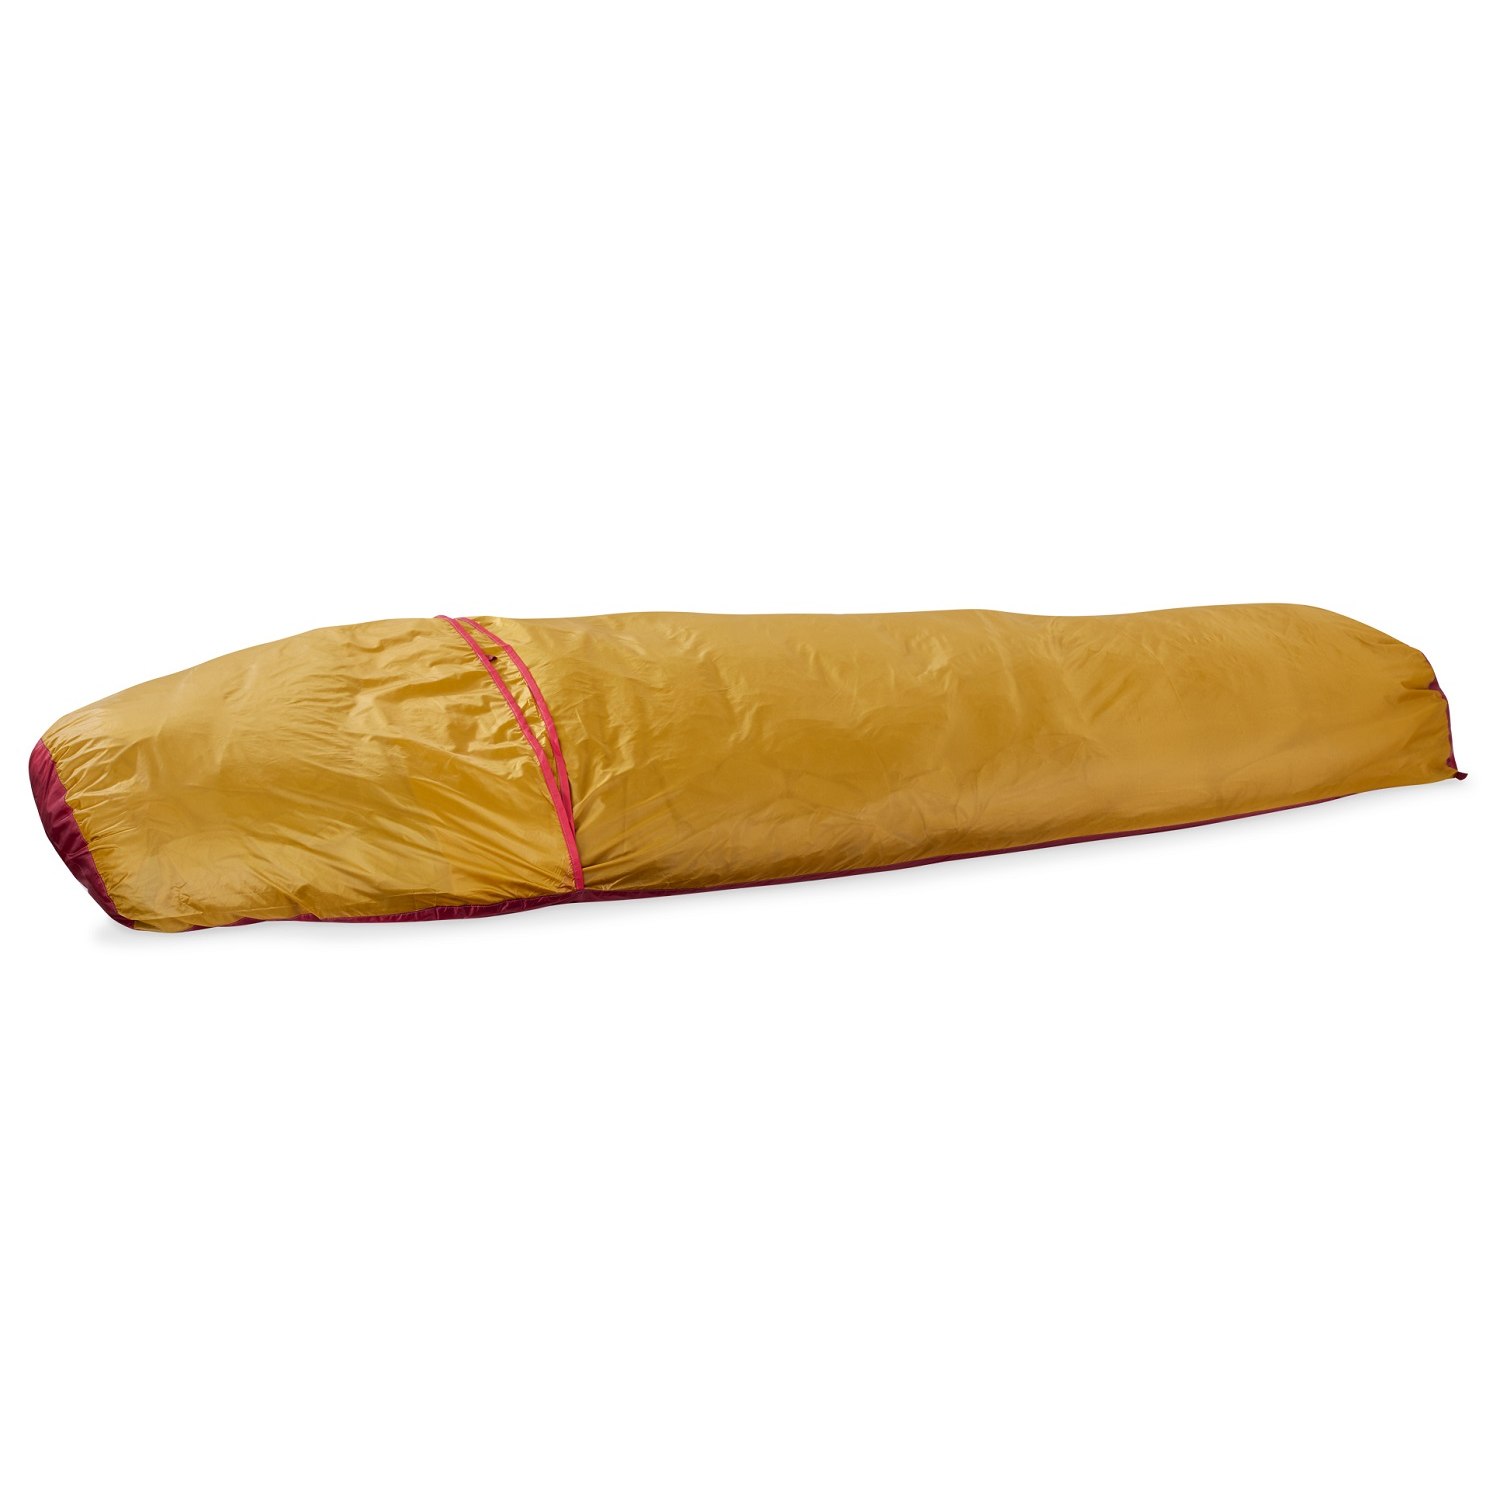 Picture of MSR E-Bivy Bag - amber